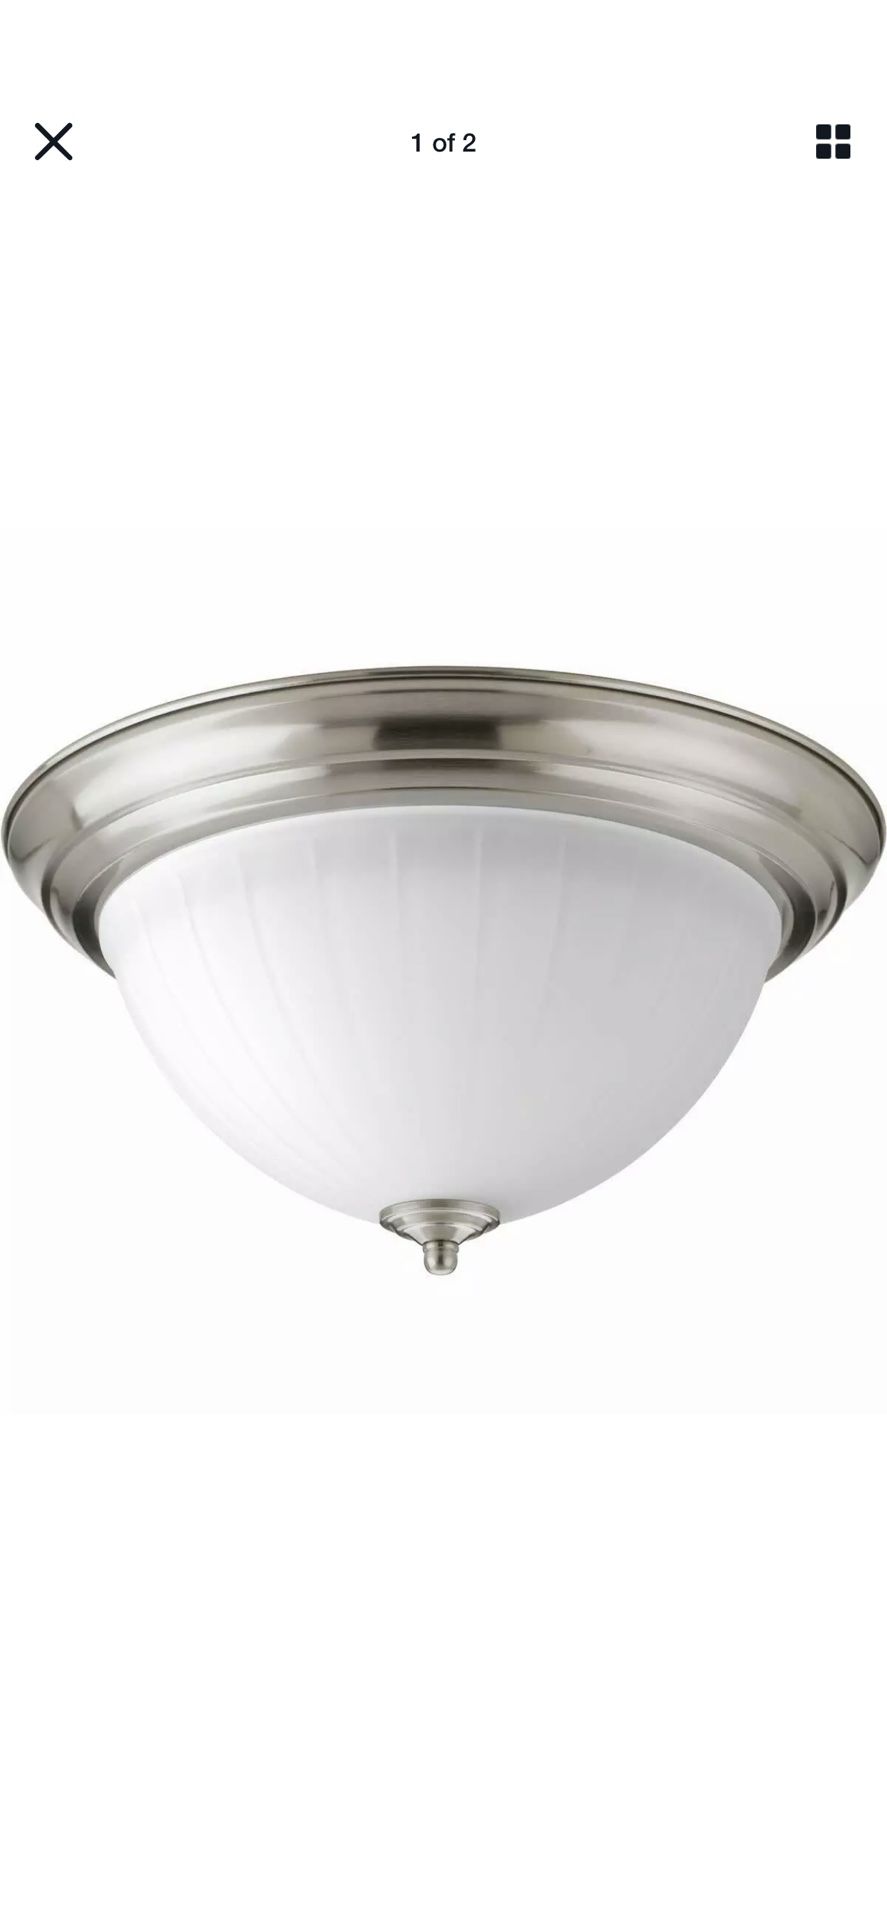 Dimmable Light fixture